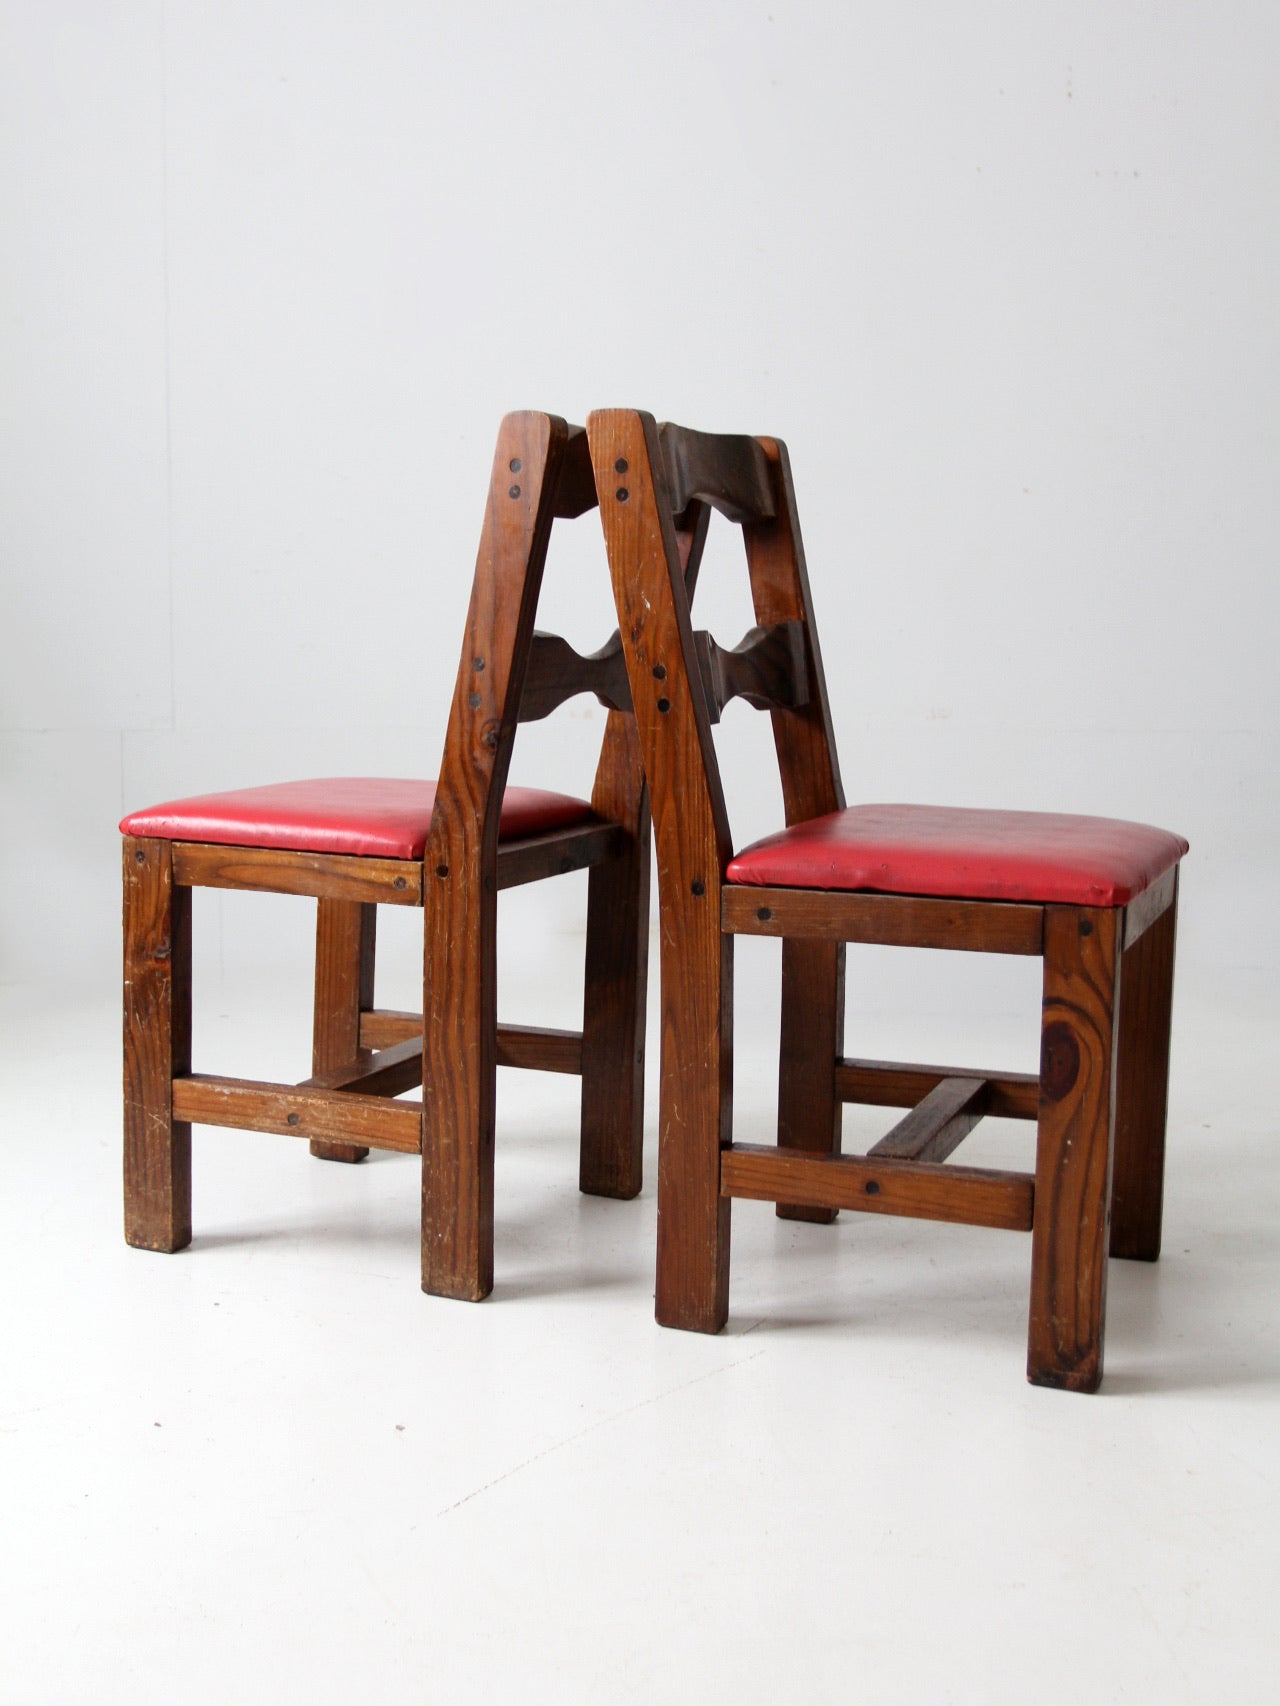 vintage upholstered seat wood chairs pair